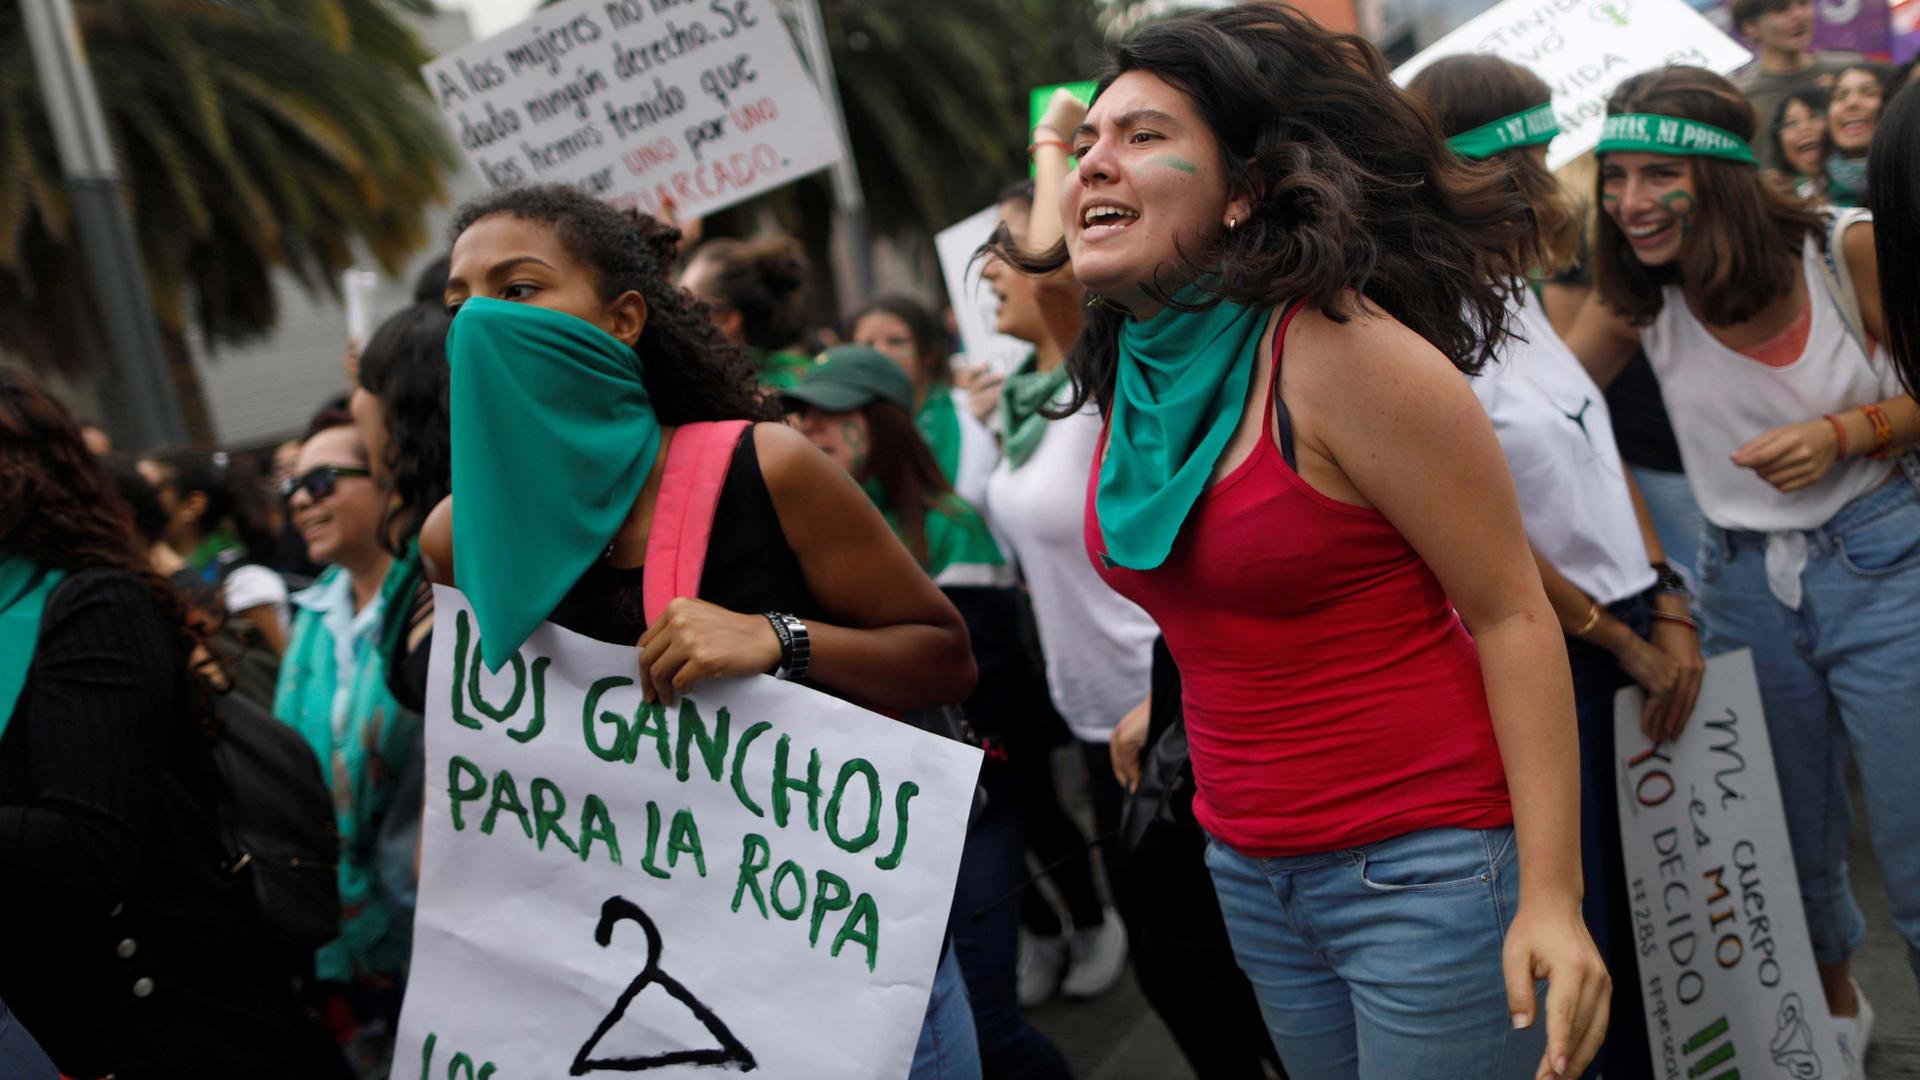 Women with green bandanas protest in a crowd